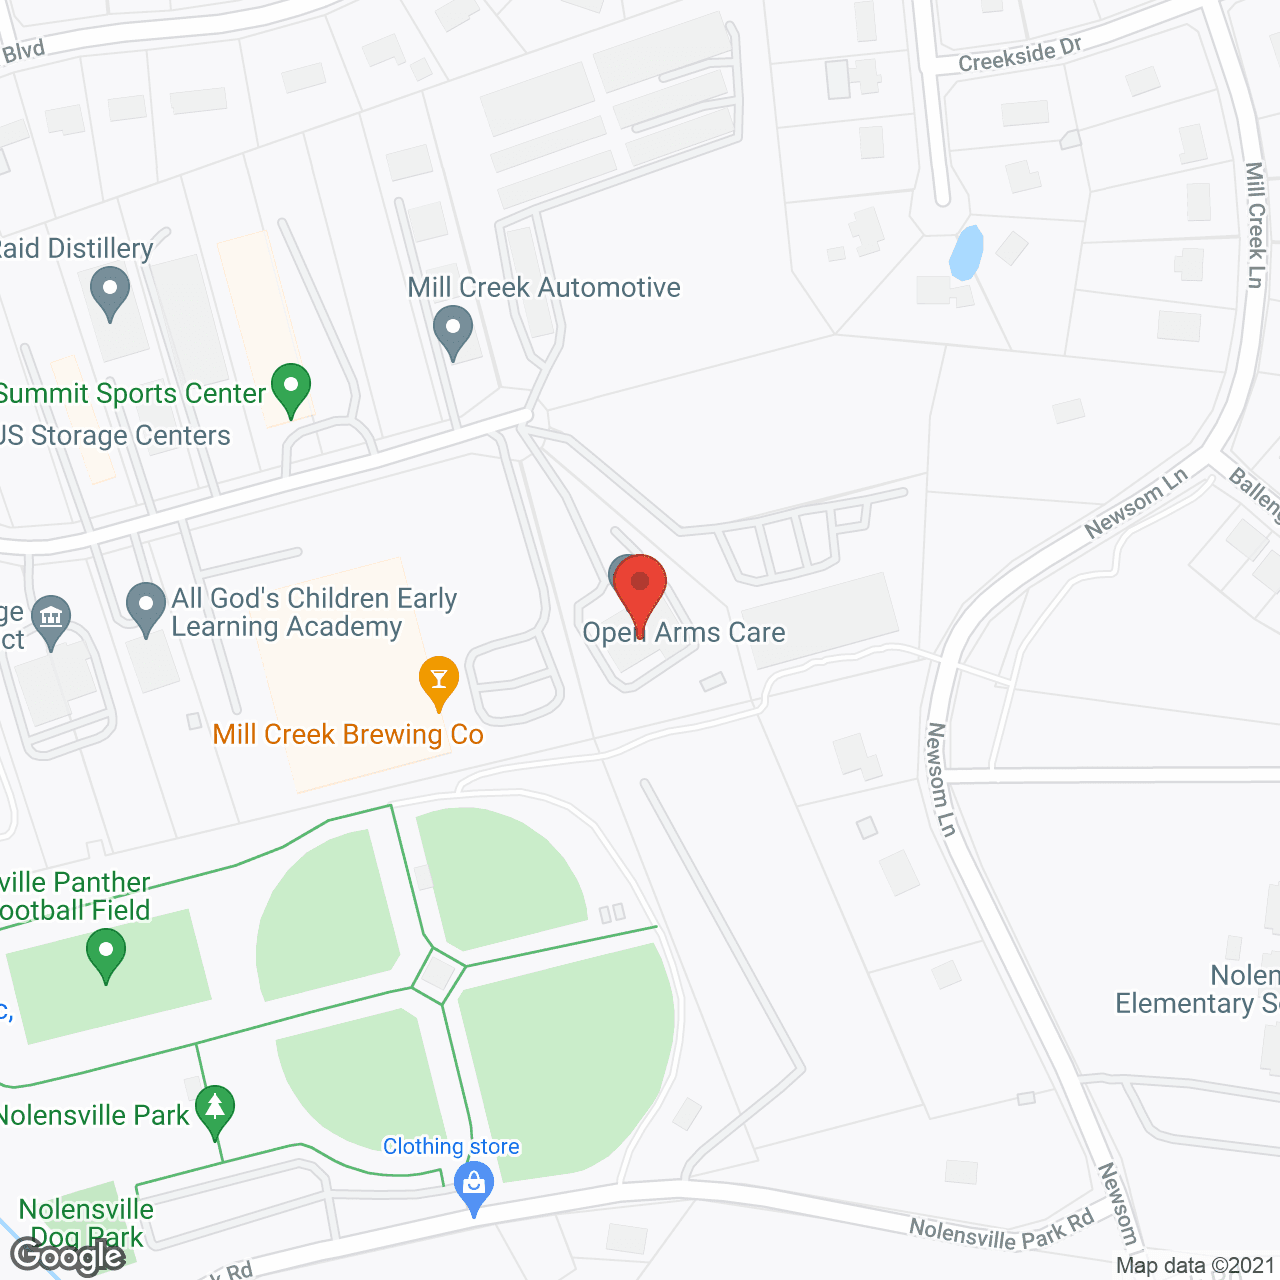 Open Arms Care in google map